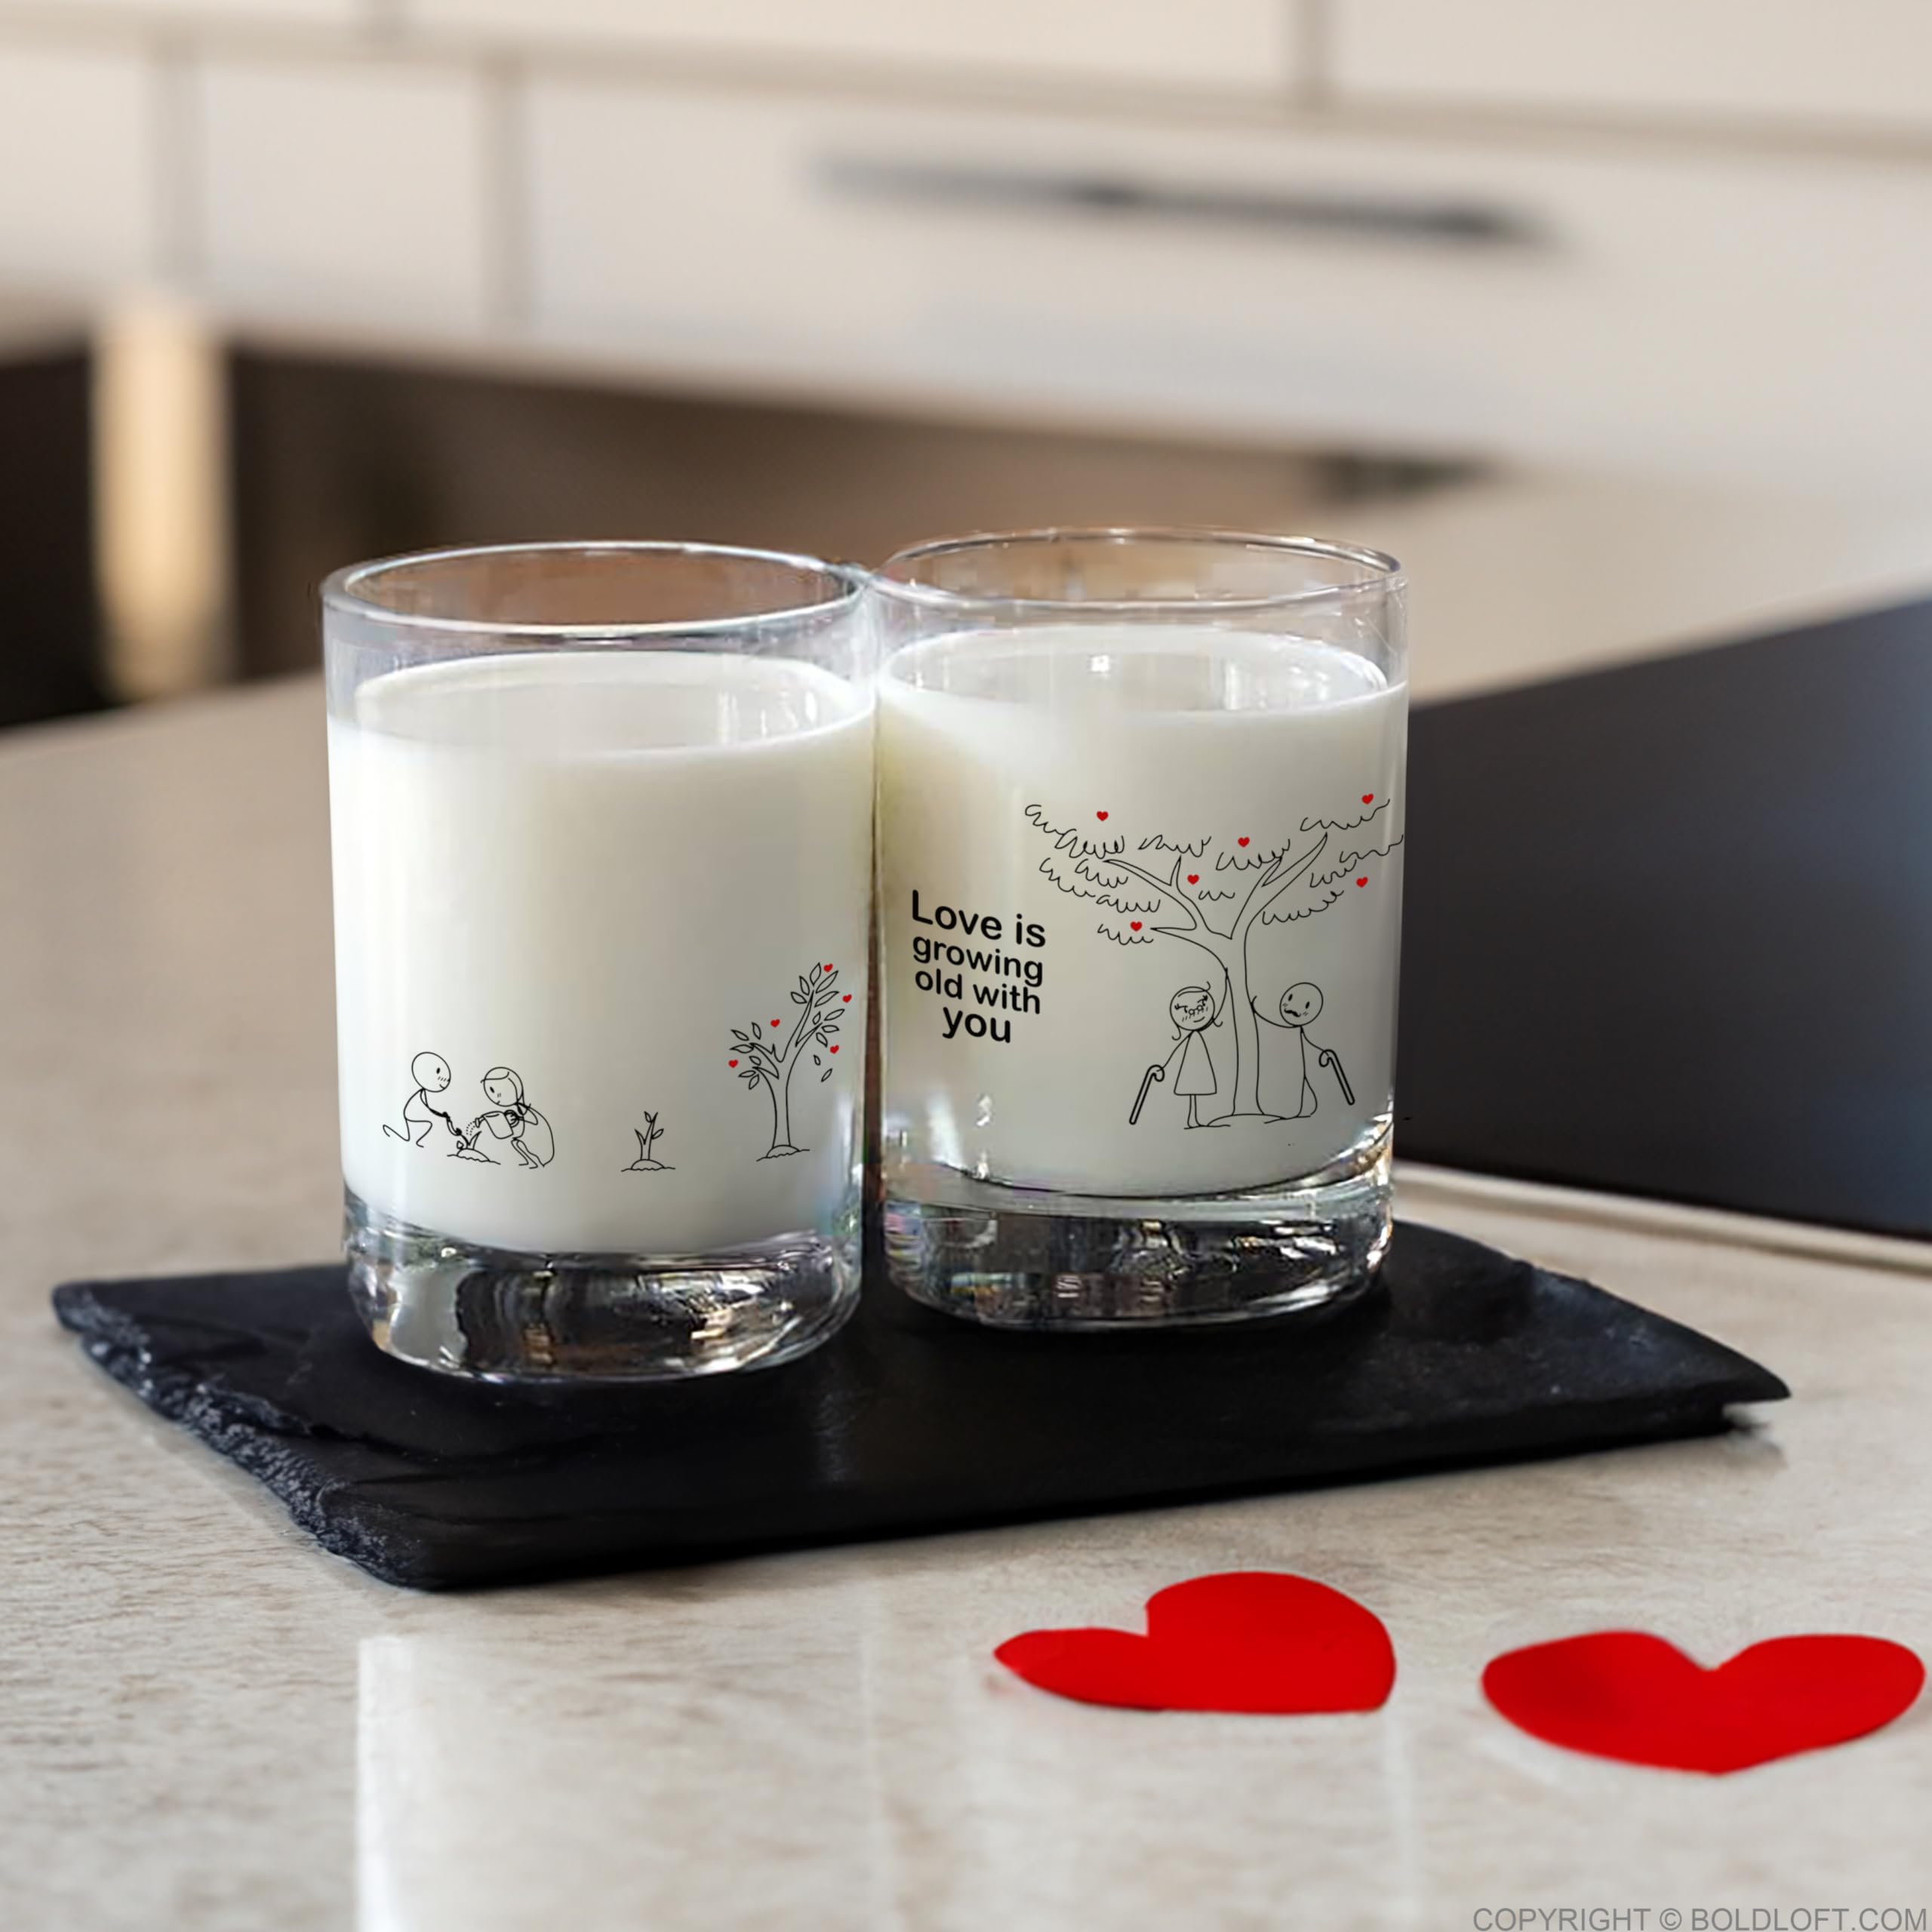 BoldLoft Grow Old with You Couple Drinking Glasses-Couple Gifts for Him Her Husband Wife His Hers Gifts for Anniversary Wedding Anniversary Dating Anniversary for Boyfriend Girlfriend